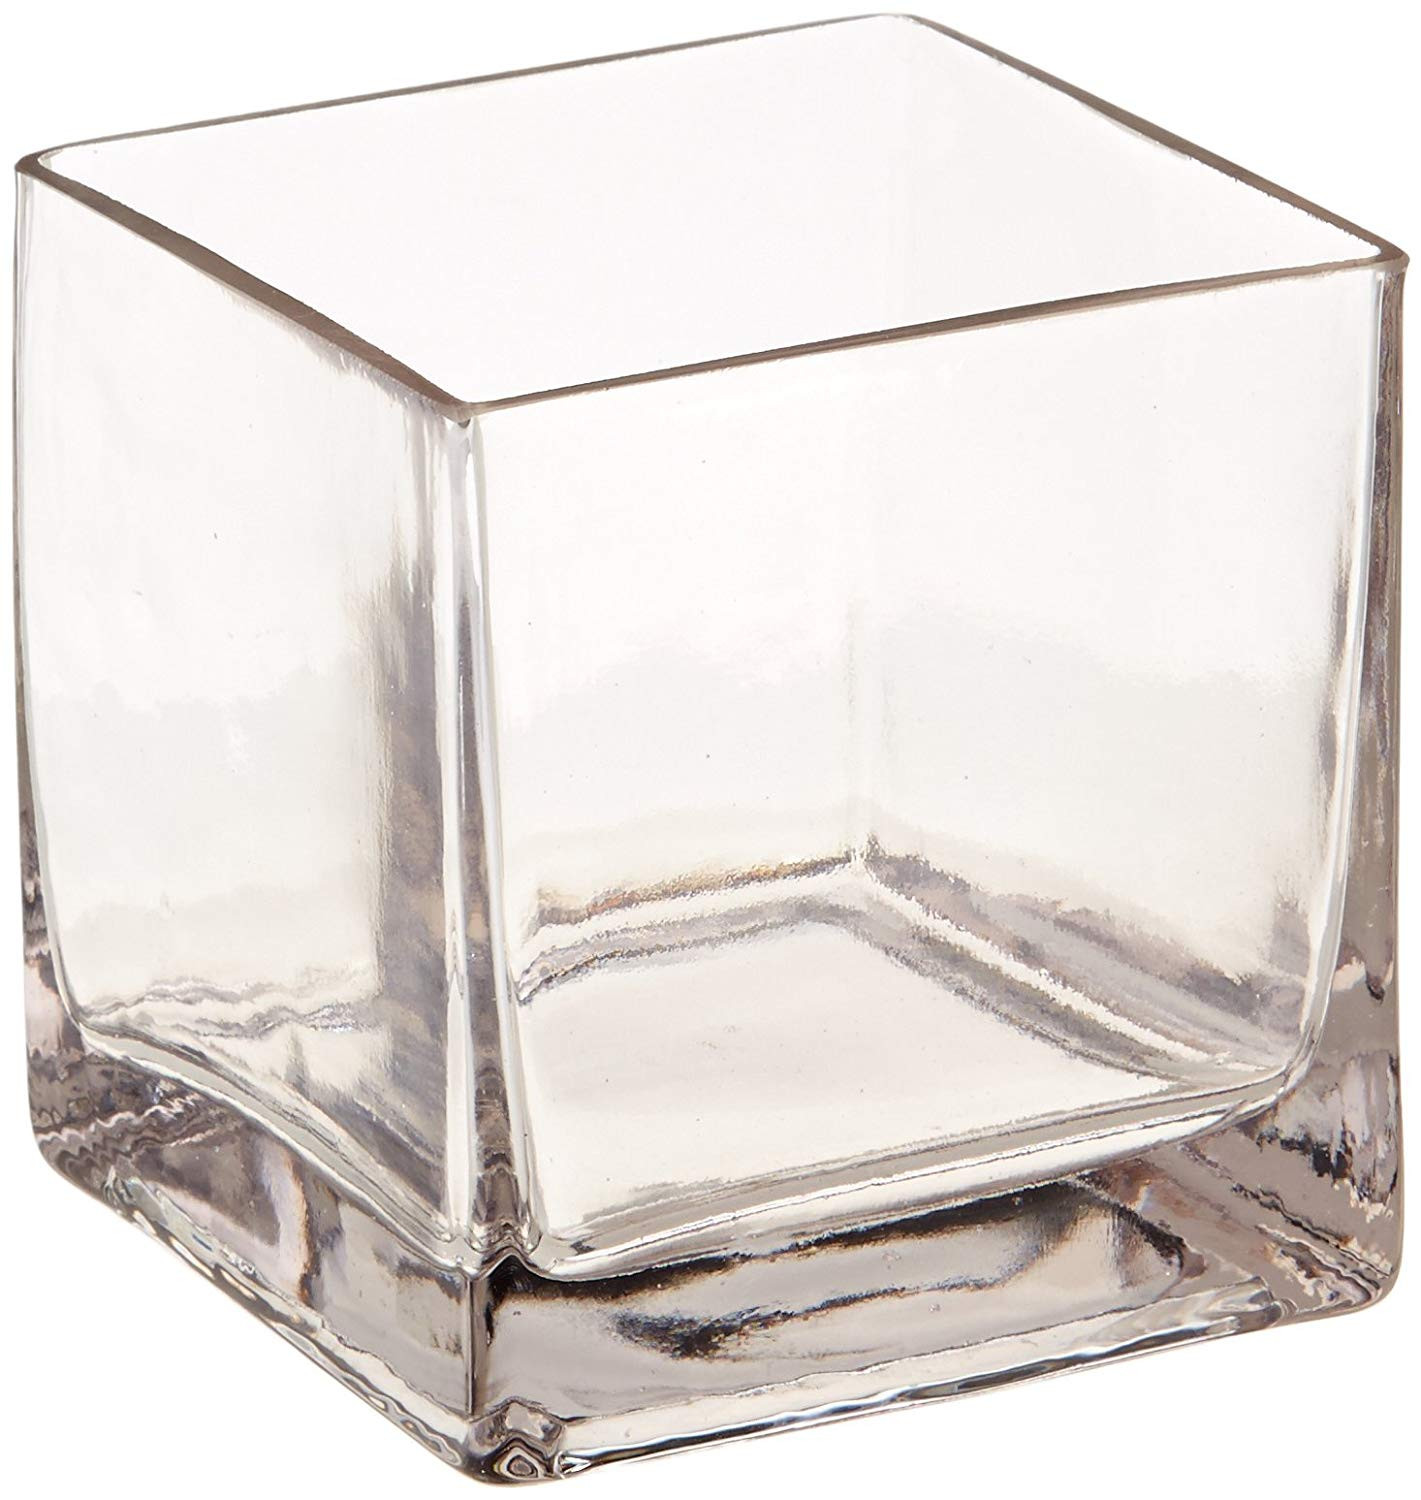 13 attractive 9 Clear Glass Cylinder Vase 2024 free download 9 clear glass cylinder vase of amazon com 12piece 4 square crystal clear glass vase home kitchen with 71 jezfmvnl sl1500